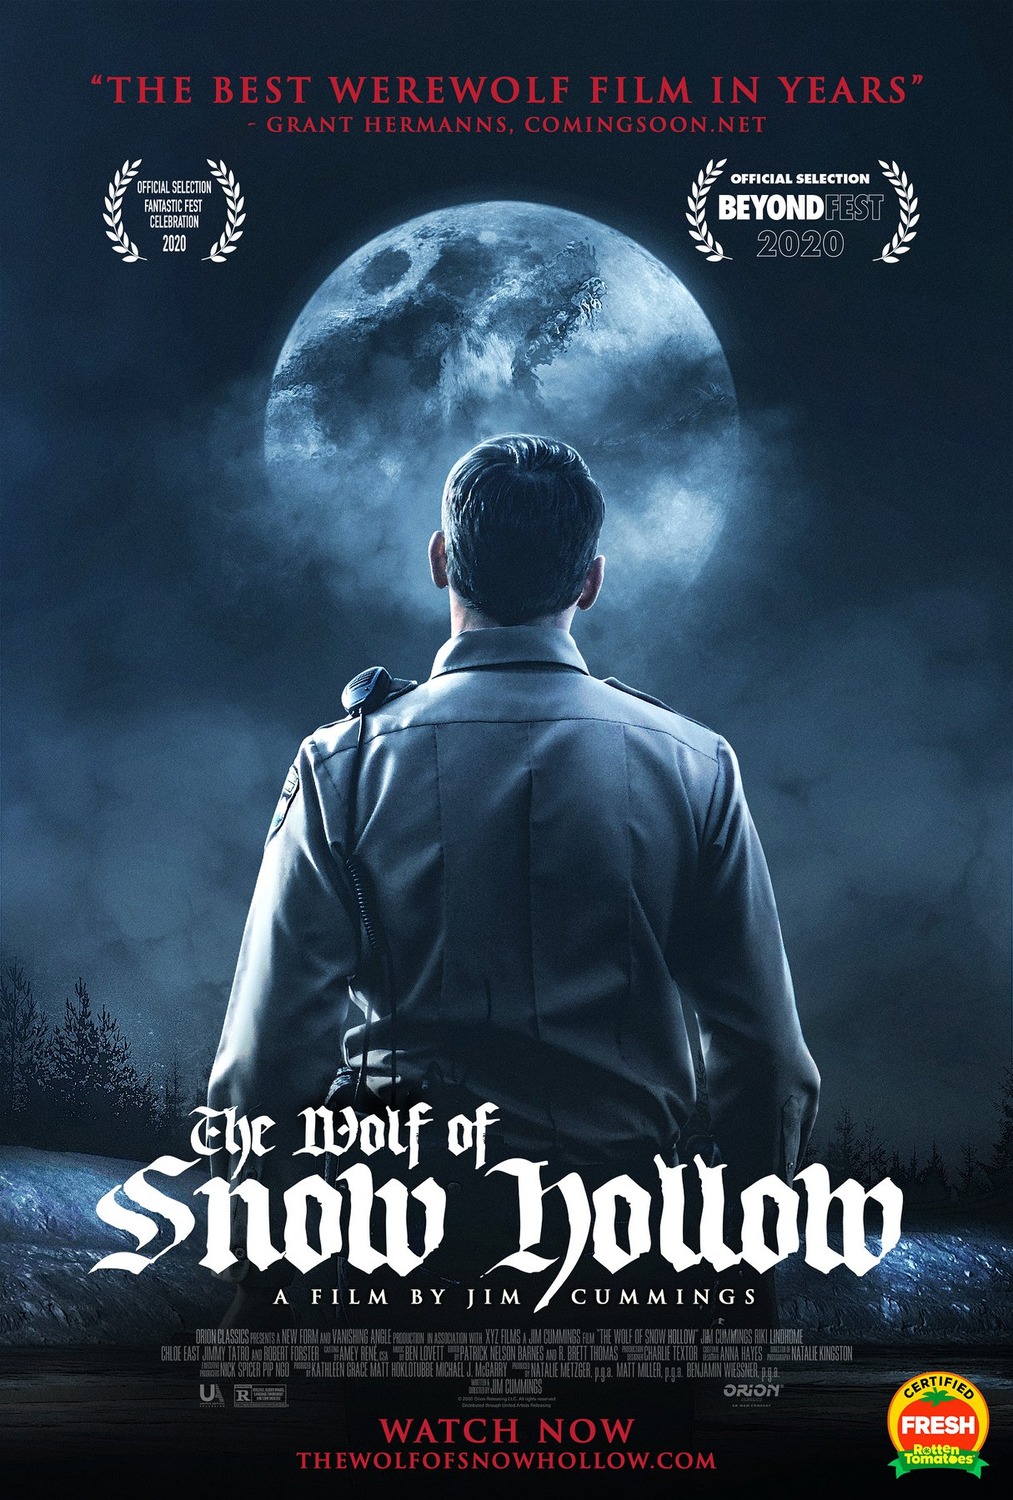 THE WOLF OF SNOW HOLLOW